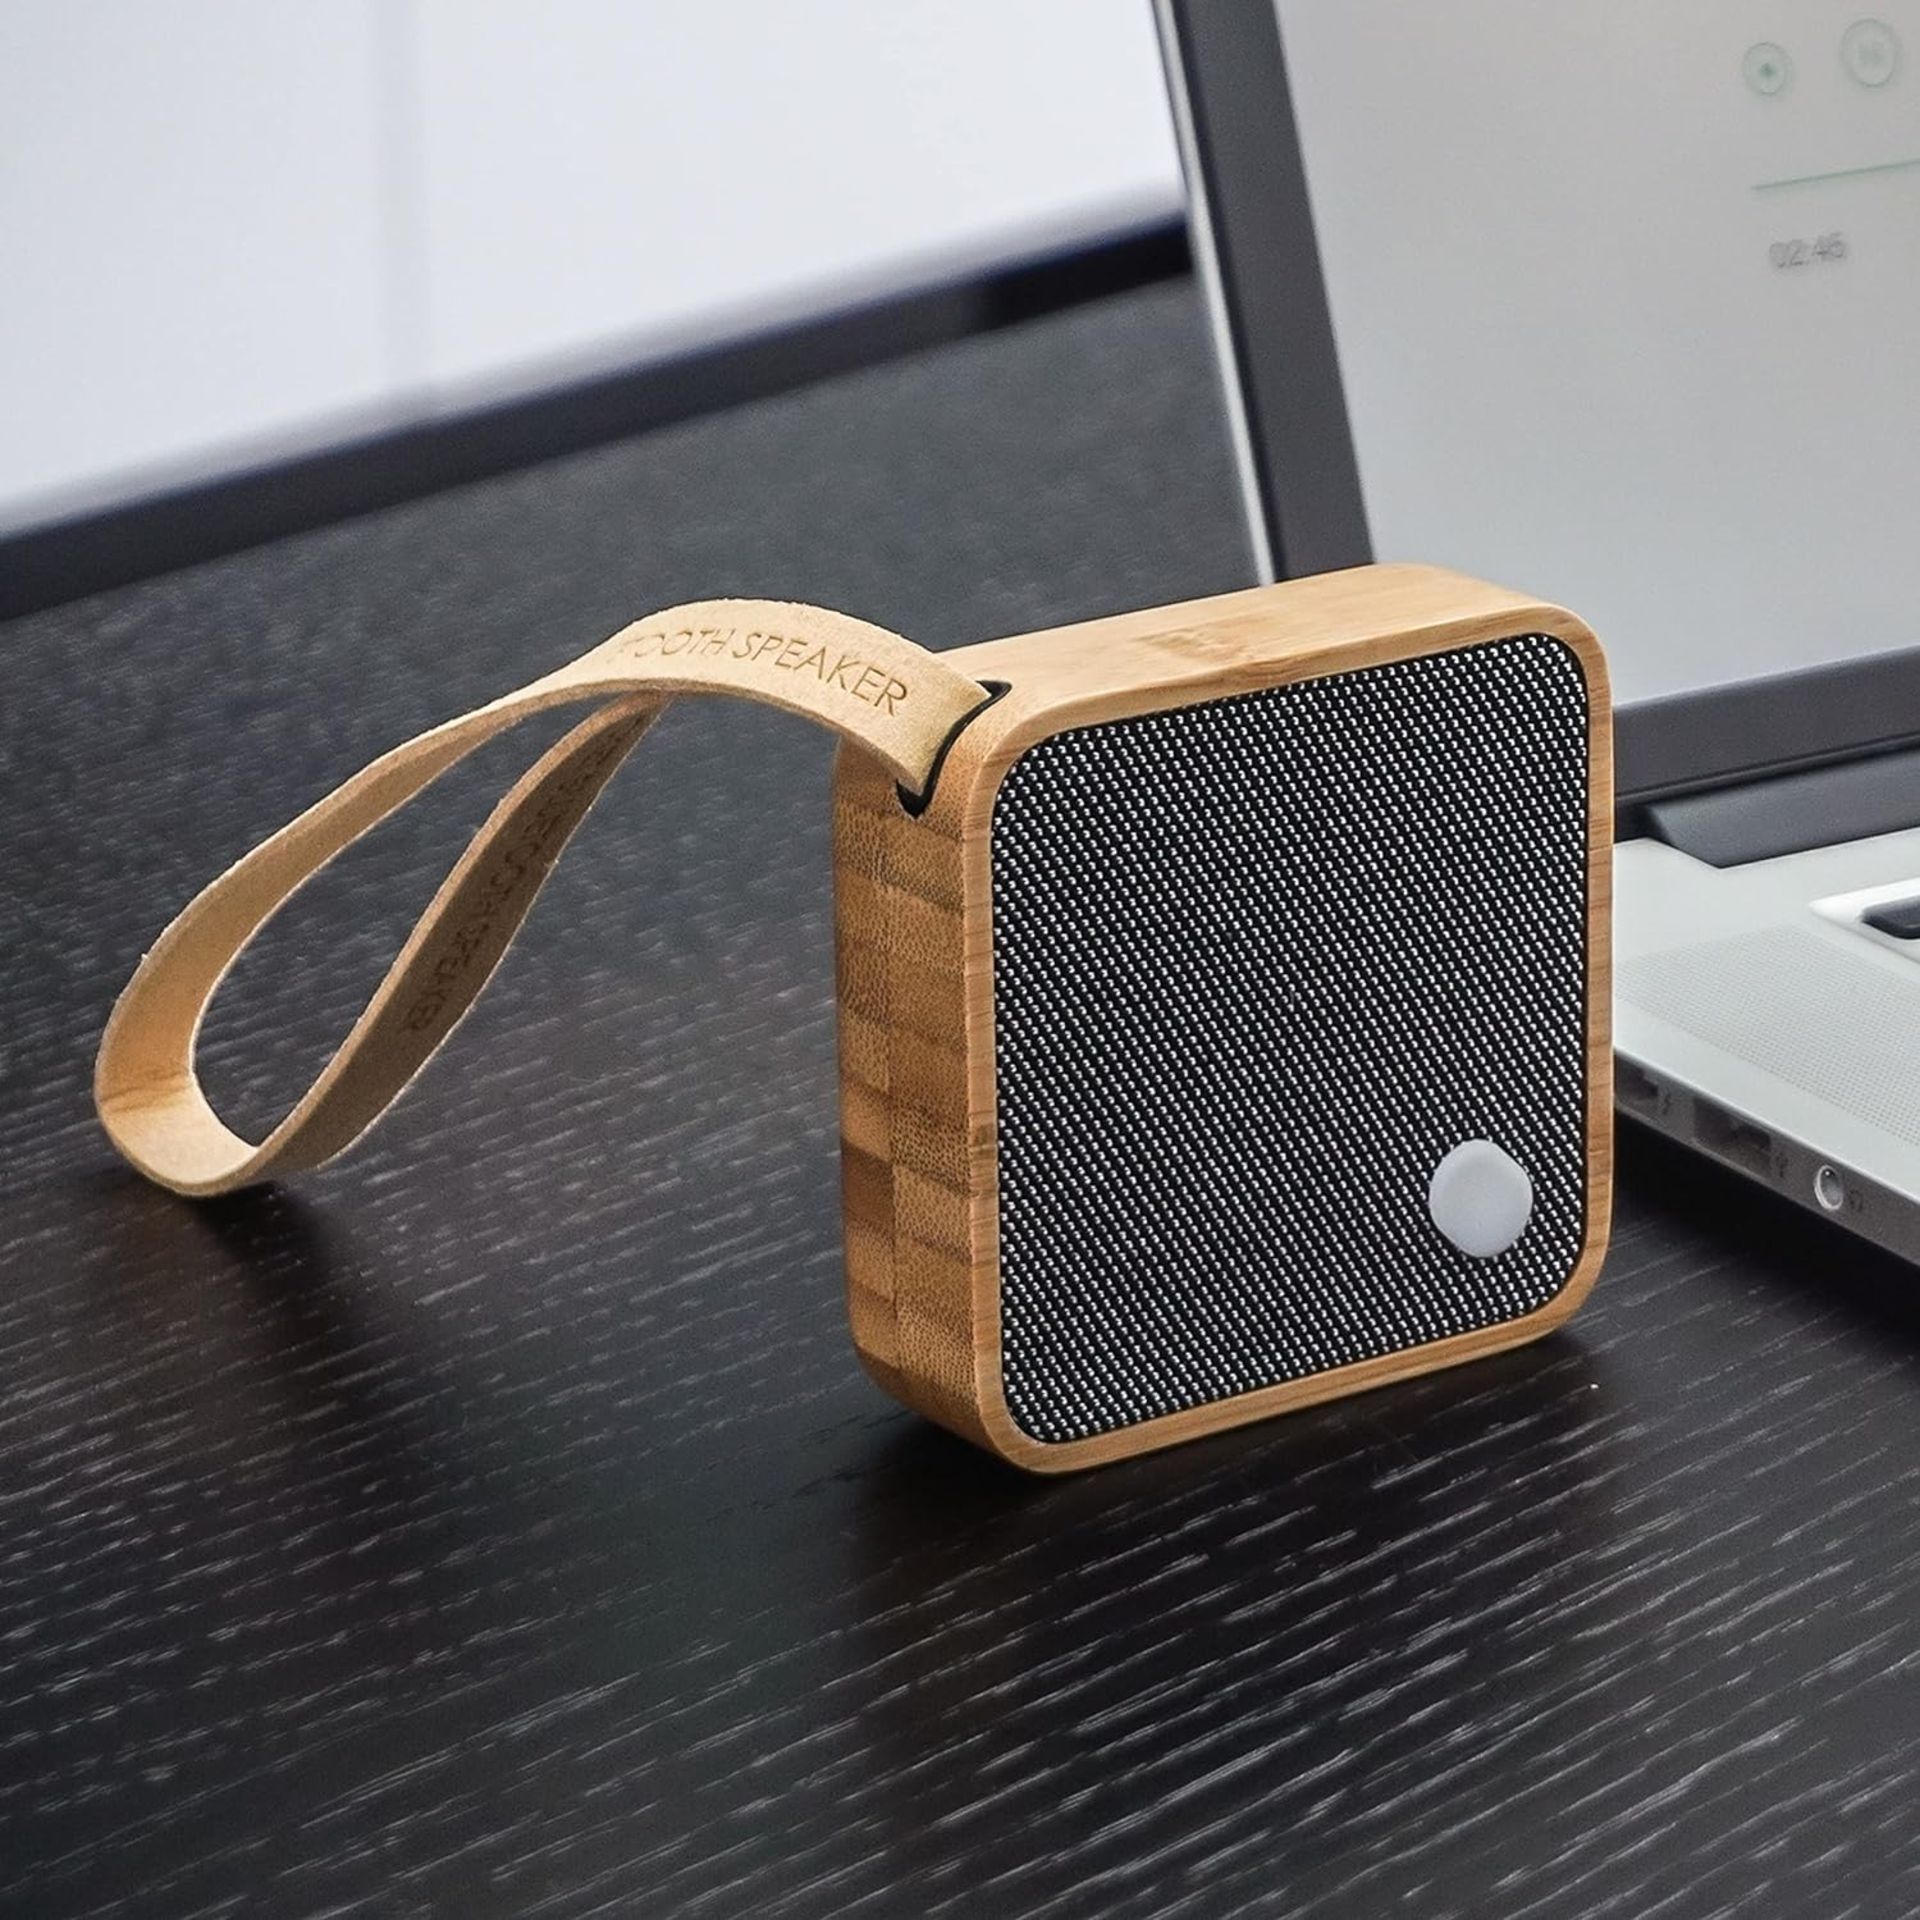 15 X NEW GINGKO MI SQUARE POCKET SOLID WOOD PORTABLE BLUETOOTH SPEAKER RECHARGEABLE BATTERY